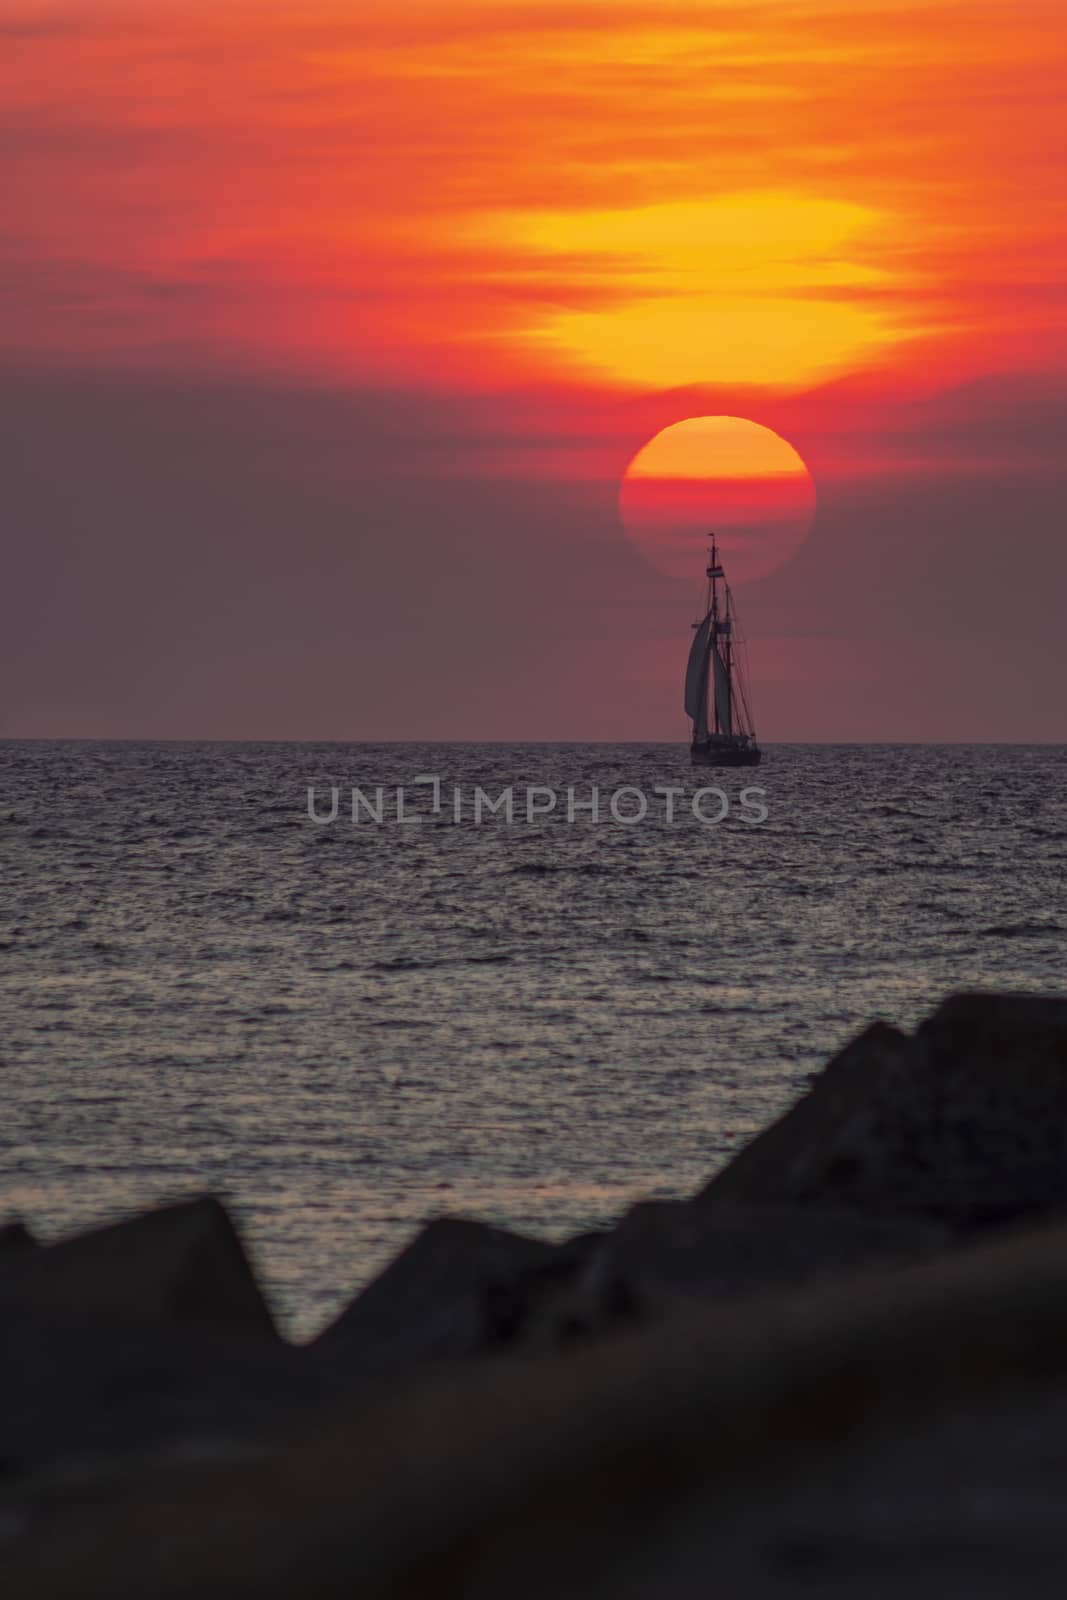 Tall ship, vessel, sailing and preparing the enter inside the harbor of Scheveningen at the vivid sunset moment, The Hague, Netherlands